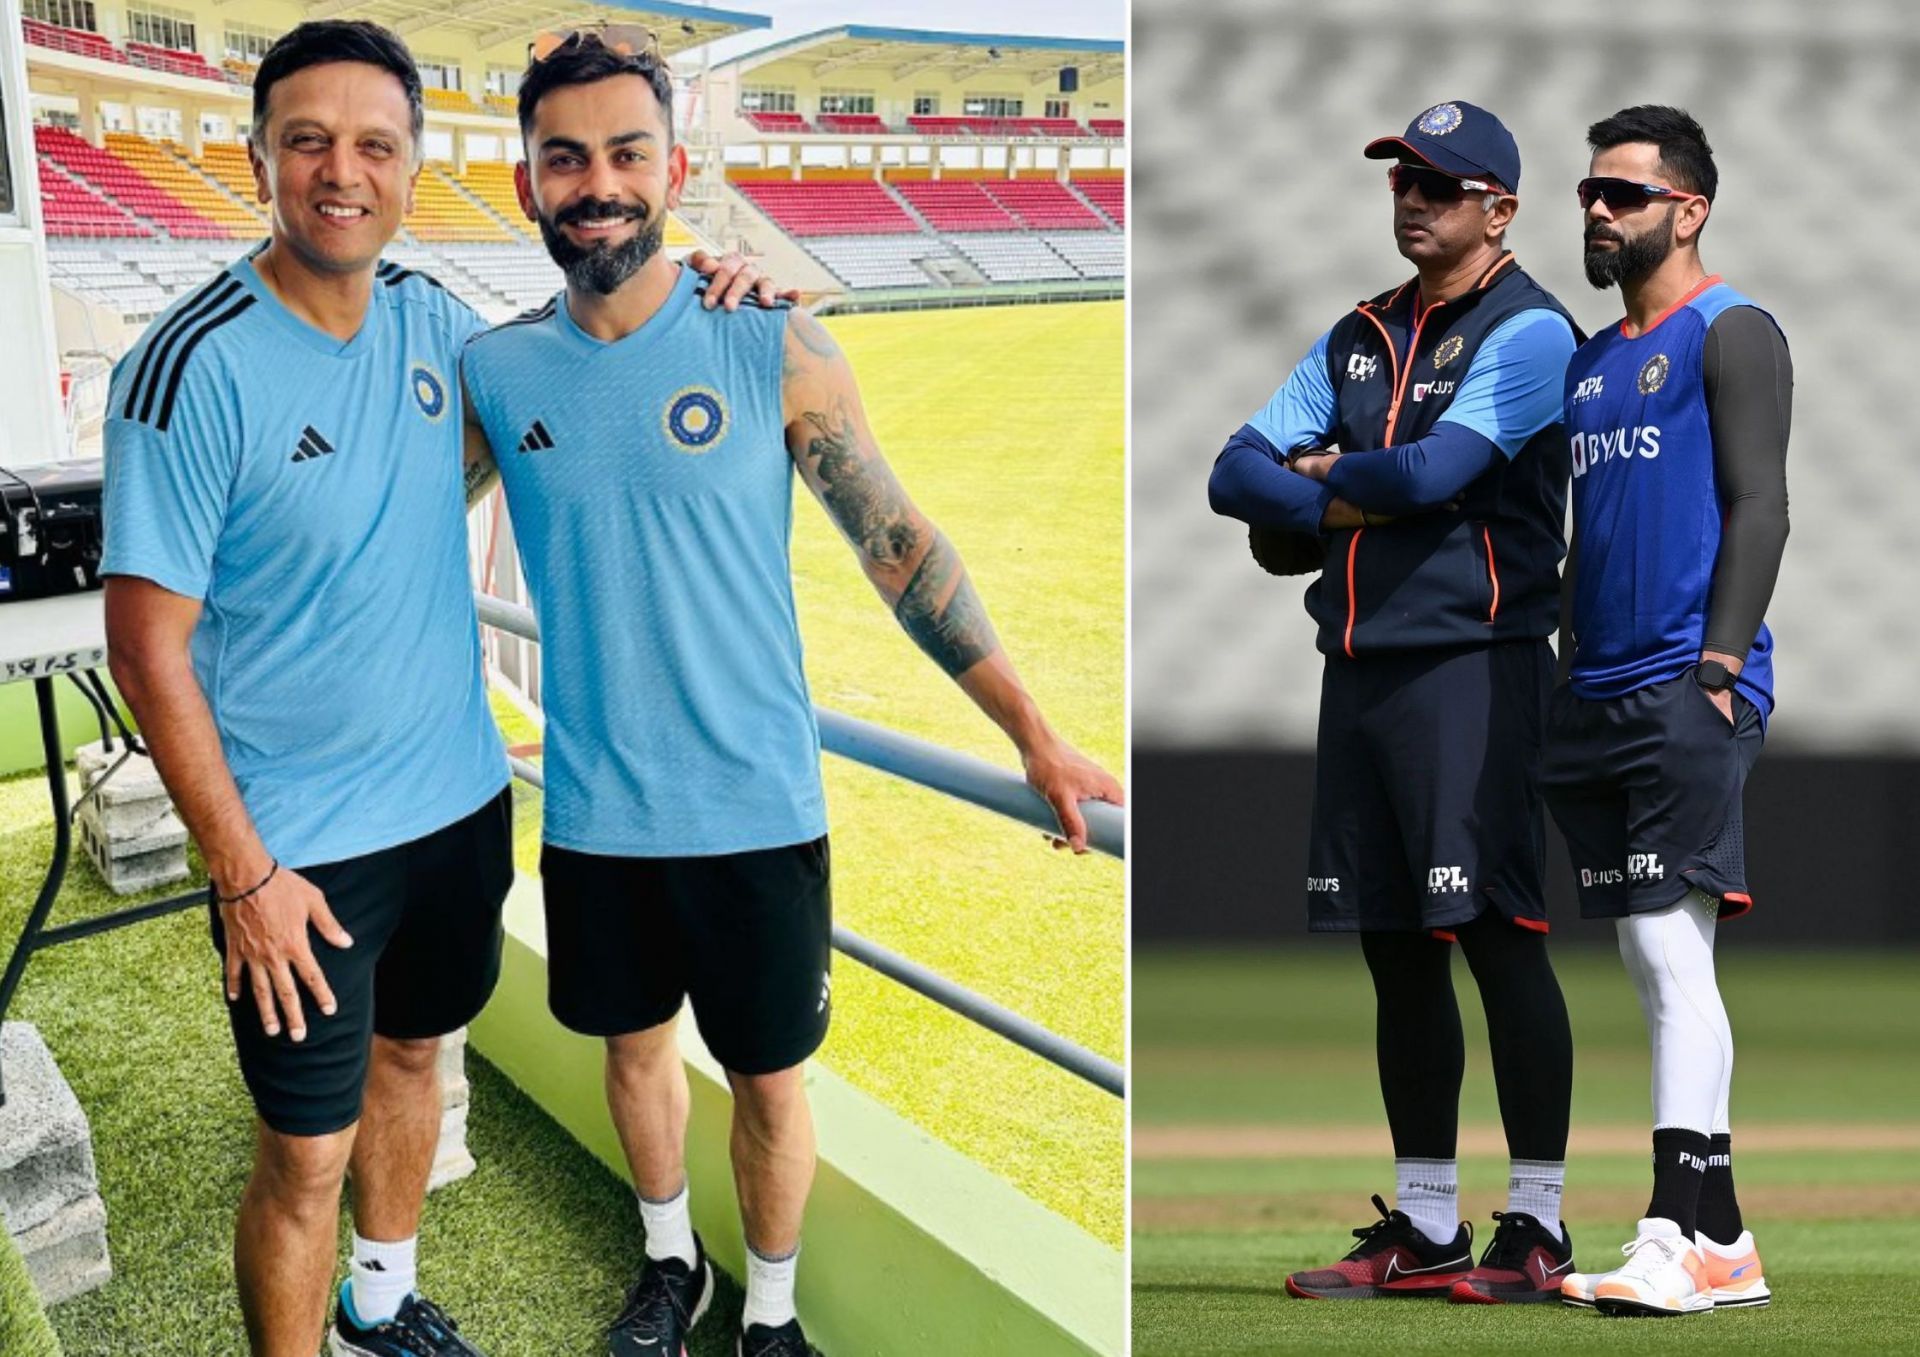 Coach Rahul Dravid and former skipper Virat Kohli are gearing up for India